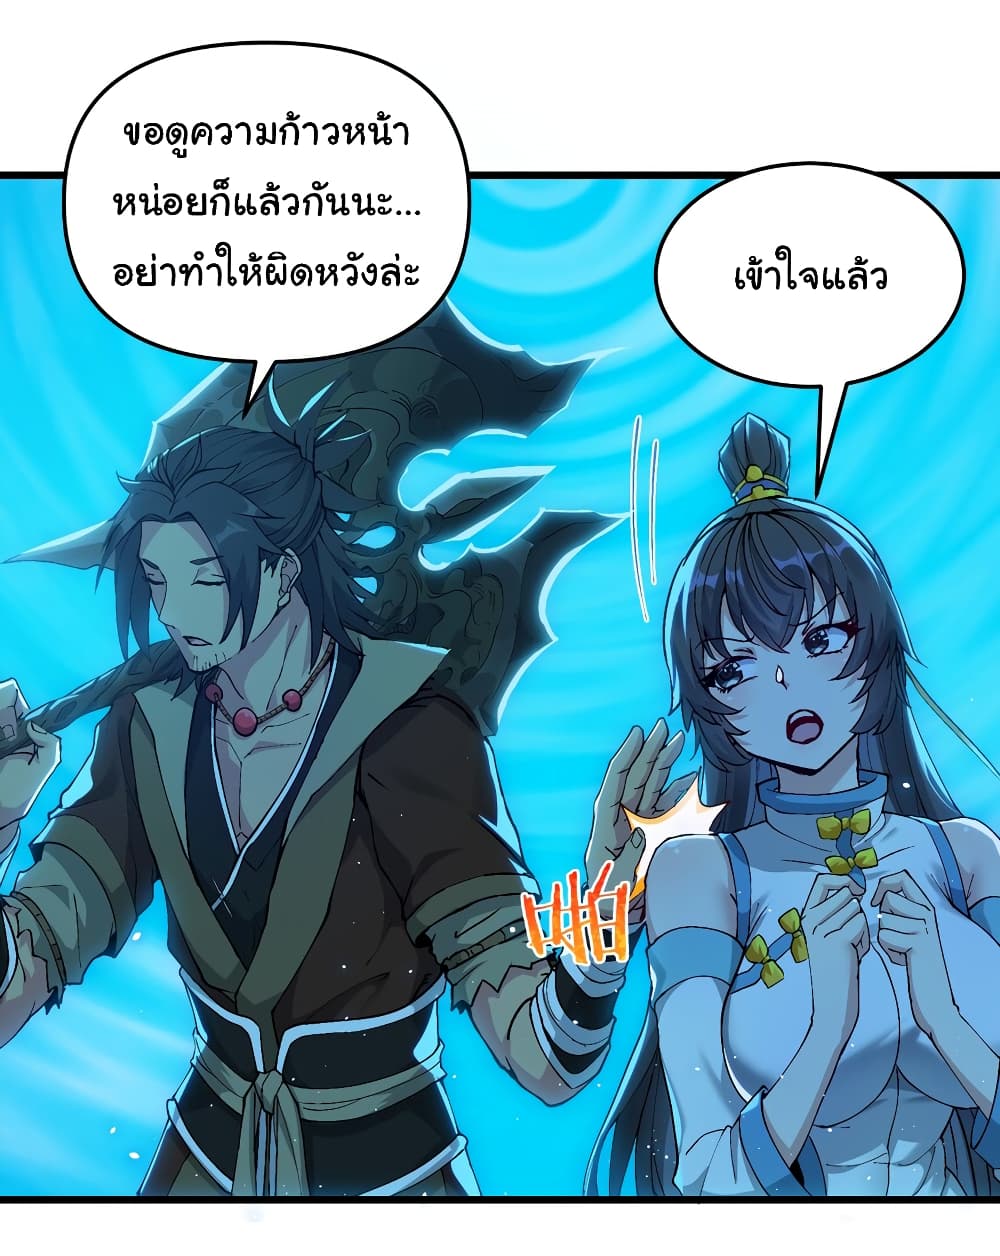 I Have Been Cutting Wood for 10 Years and Suddenly a Beautiful Girl Asks to Be a Disciple ตอนที่ 4 (